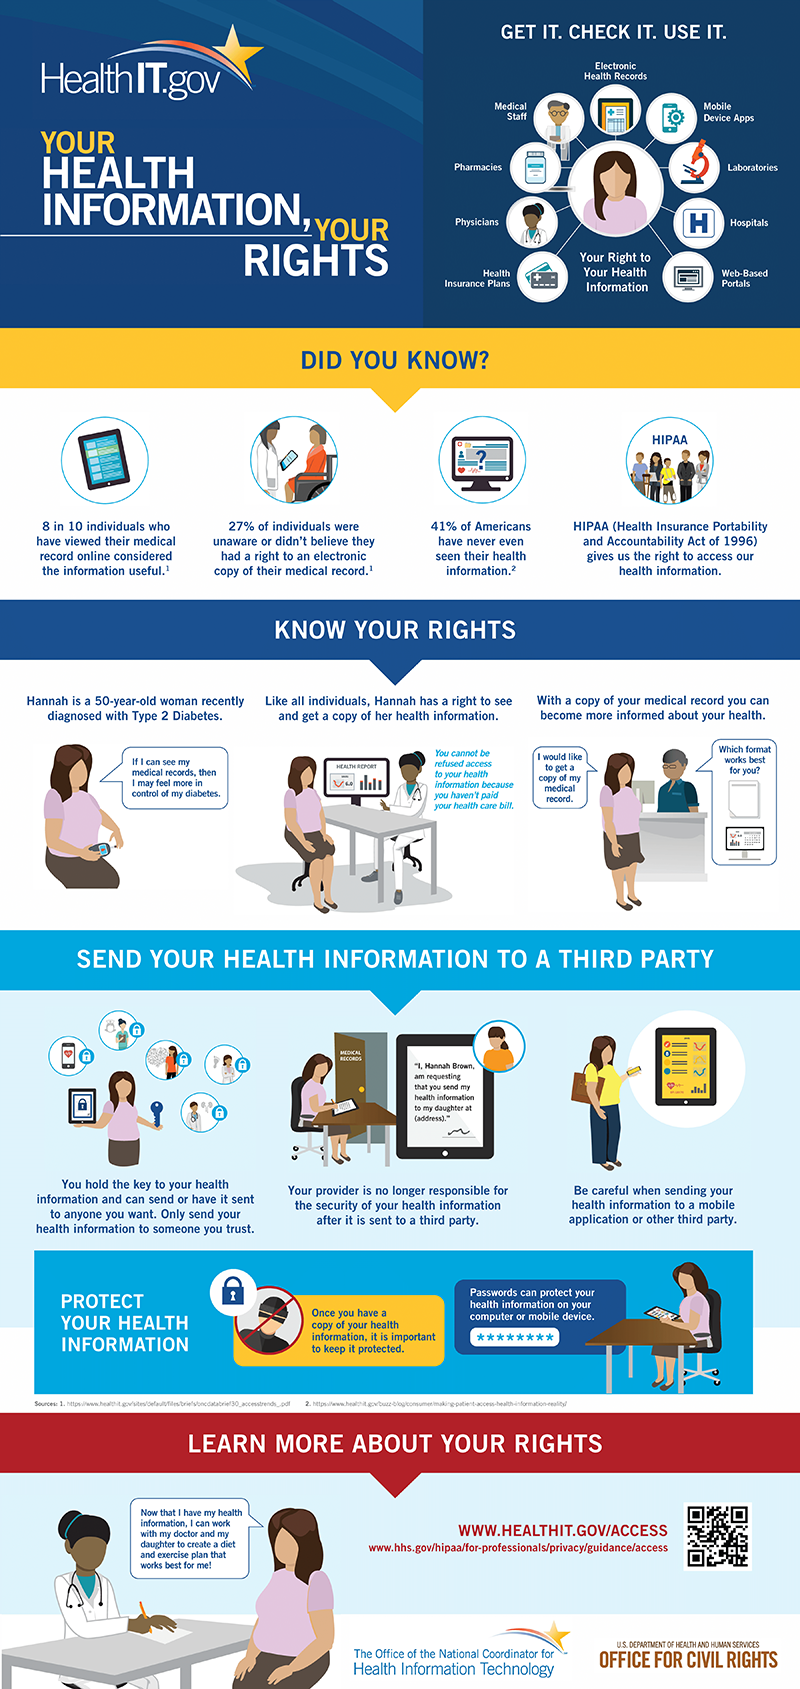 This infographic, titled Your Health Information, Your Rights, was created by the Office of the National Coordinator for Health Information Technology and the U. S. Department of Health and Human Services Office for Civil Rights.  The infographic includes facts pertaining to an individual's right to accessing their medical records, a demonstration of how to obtain medical records and tips for protecting health information.